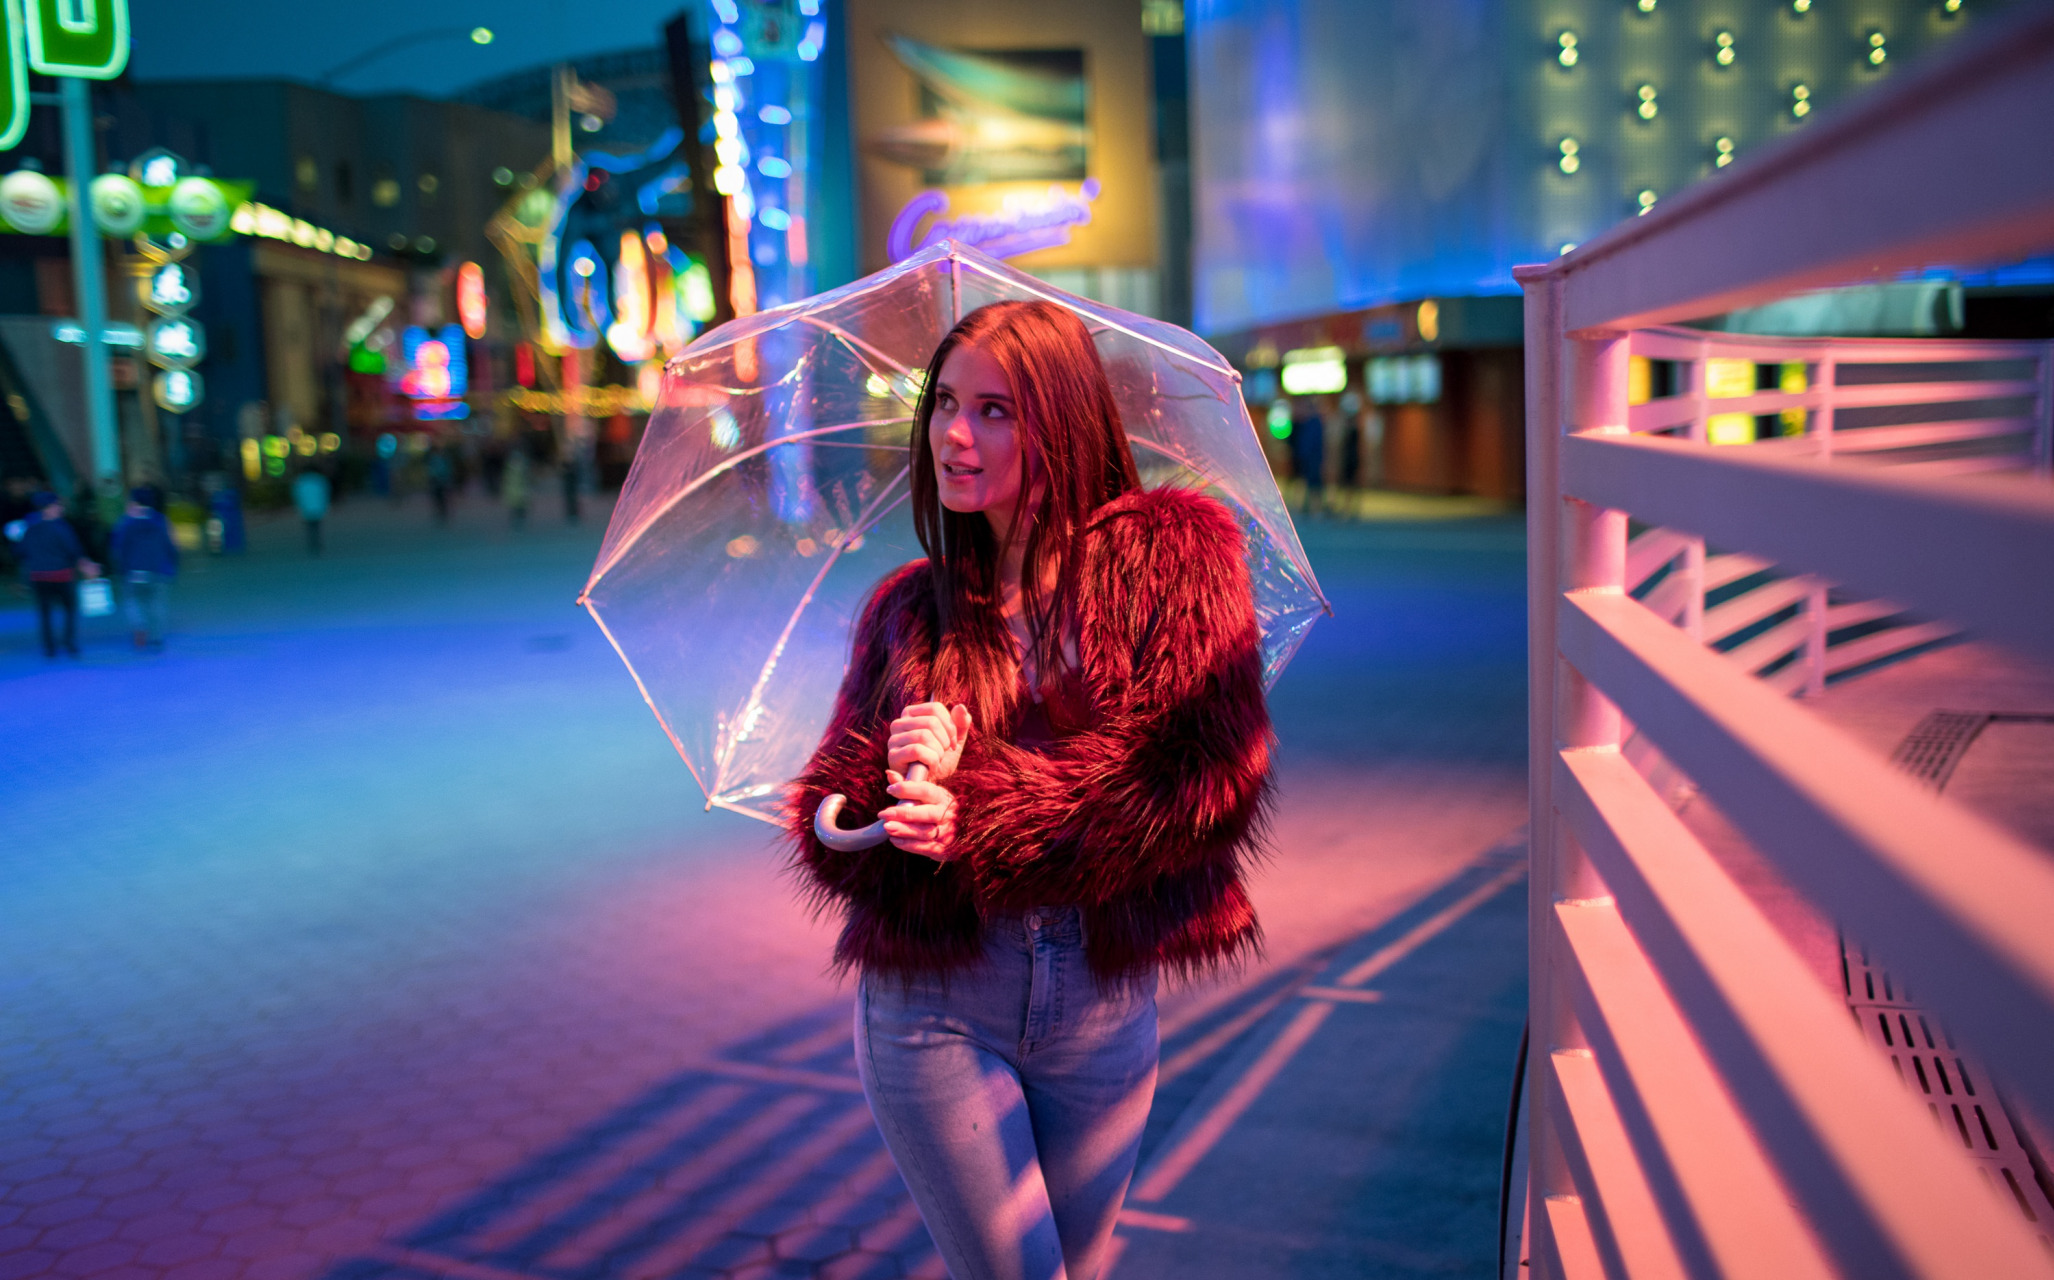 Fur Coats Red Clothing Fur Jacket Looking Away Looking At The Side Women Outdoors Redhead Umbrella J 2054x1280